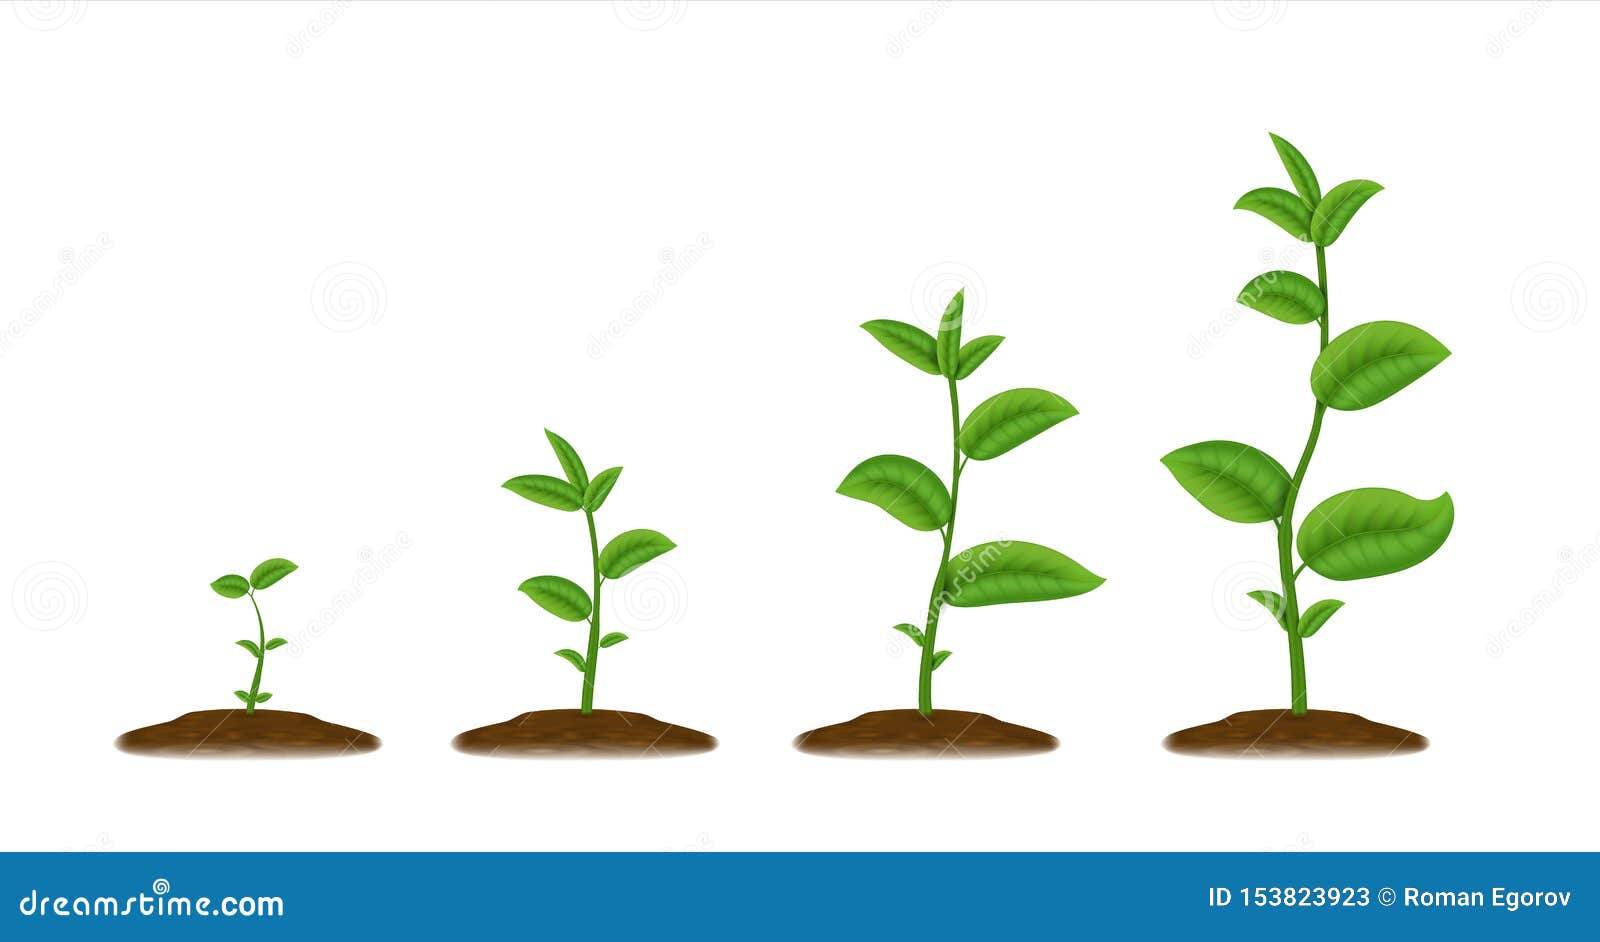 realistic sprouts. green plant stages of growth, agricultural plant seedling in ground.  young green been grow